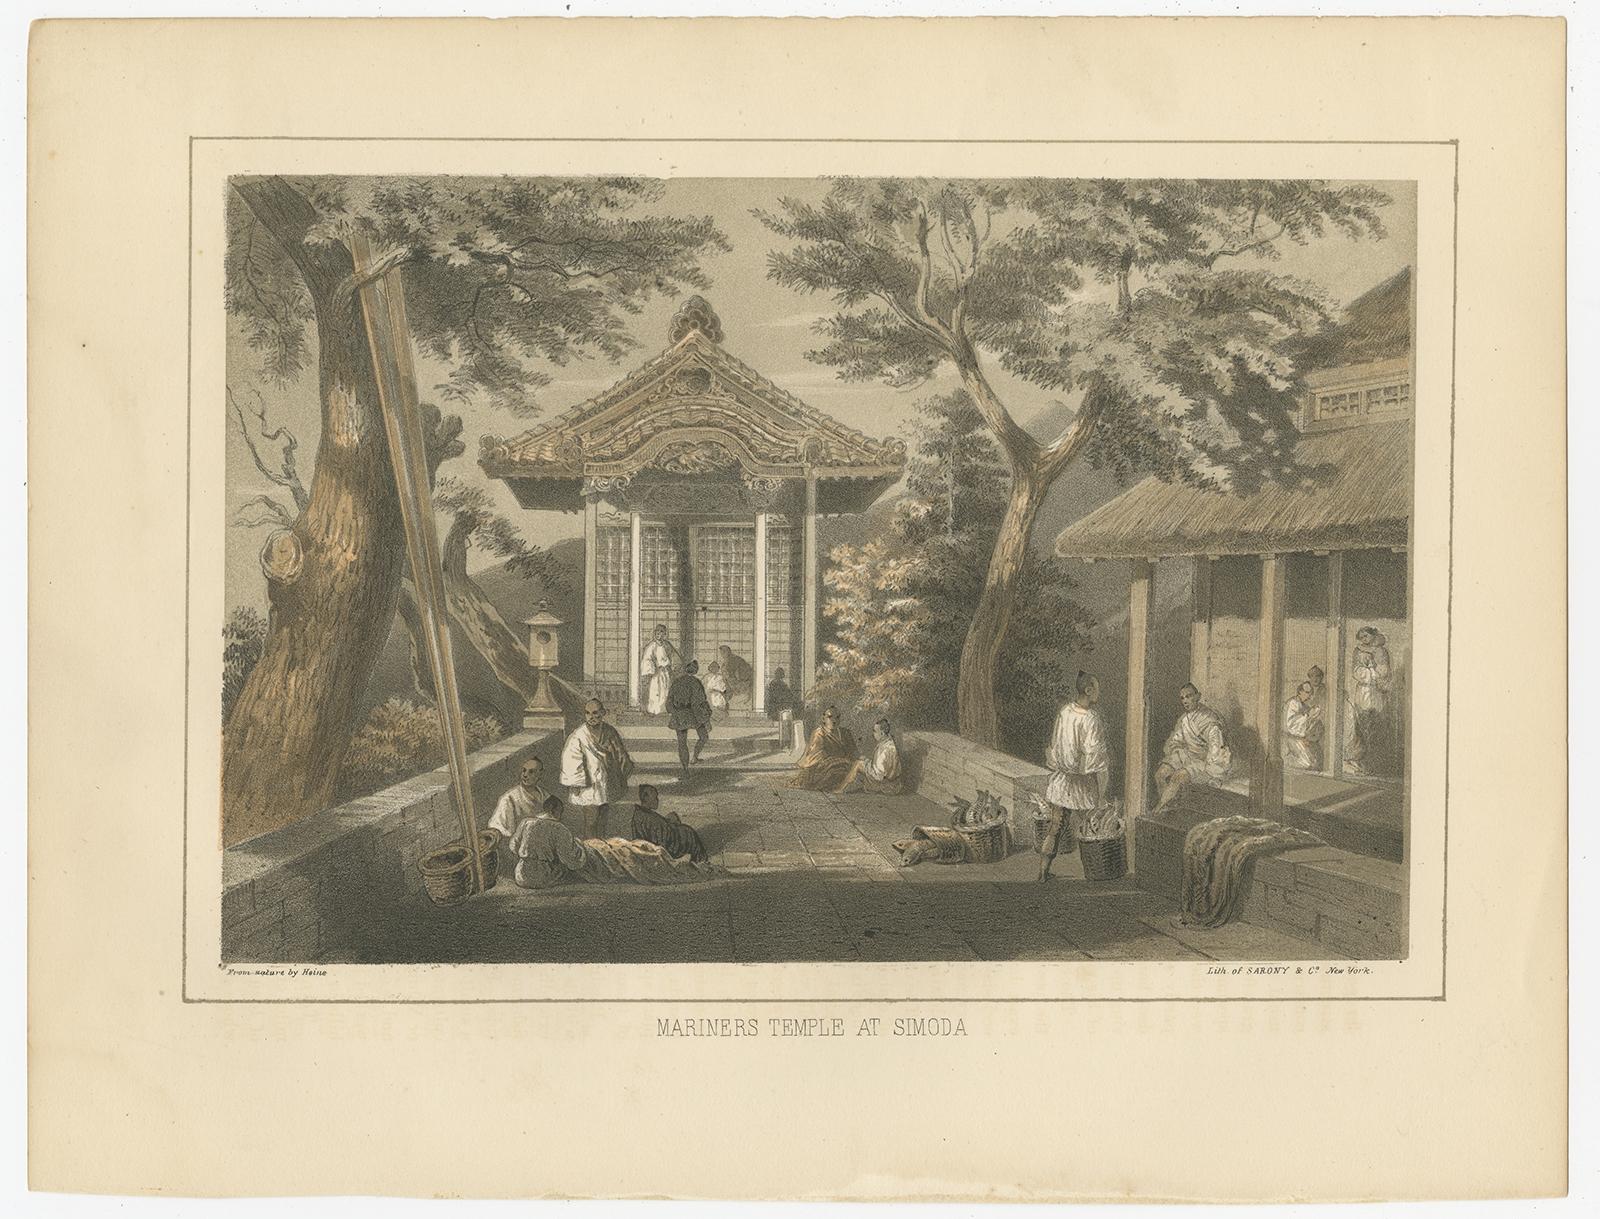 Description: Antique print titled 'Mariners Temple at Simoda‘. 

View of the mariners temple in Shimoda, Japan. 

This print originates from 'Narrative of the expedition of an American squadron to the China seas and Japan, performed in the years